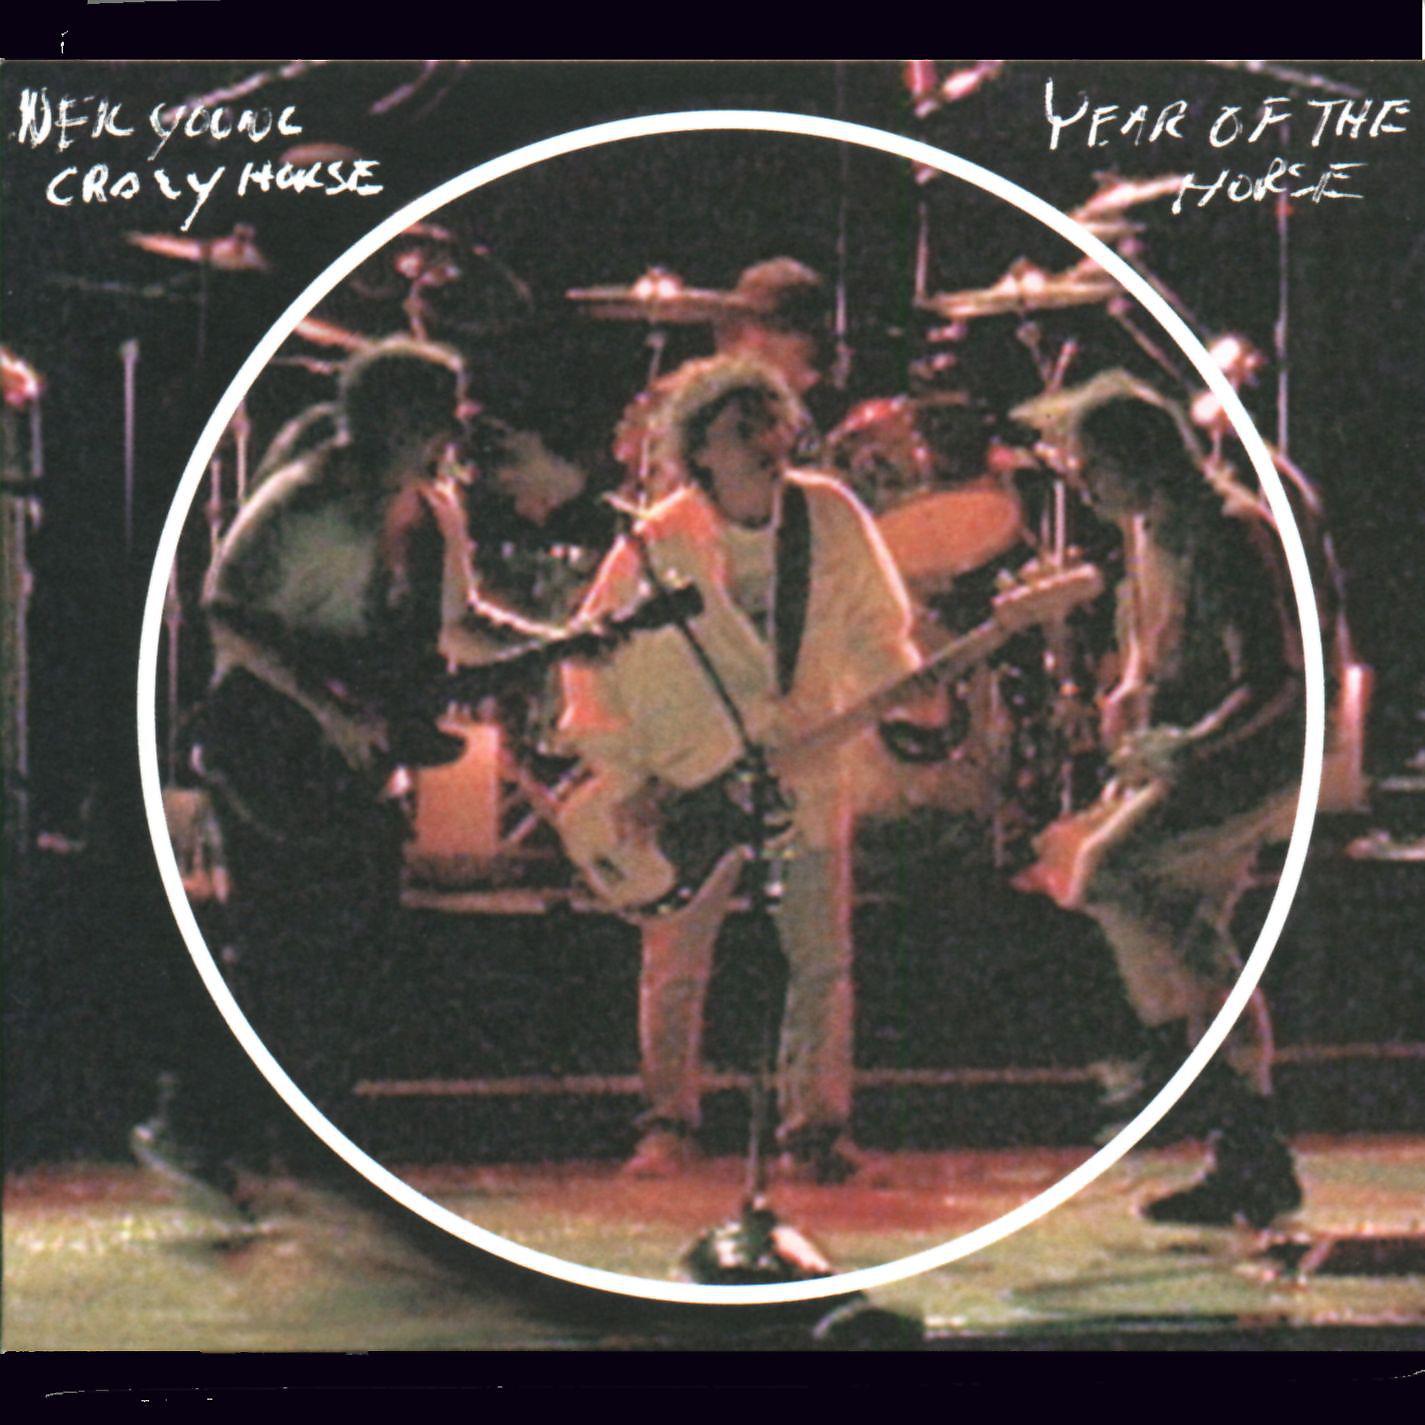 Neil young crazy horse rust never sleeps фото 105